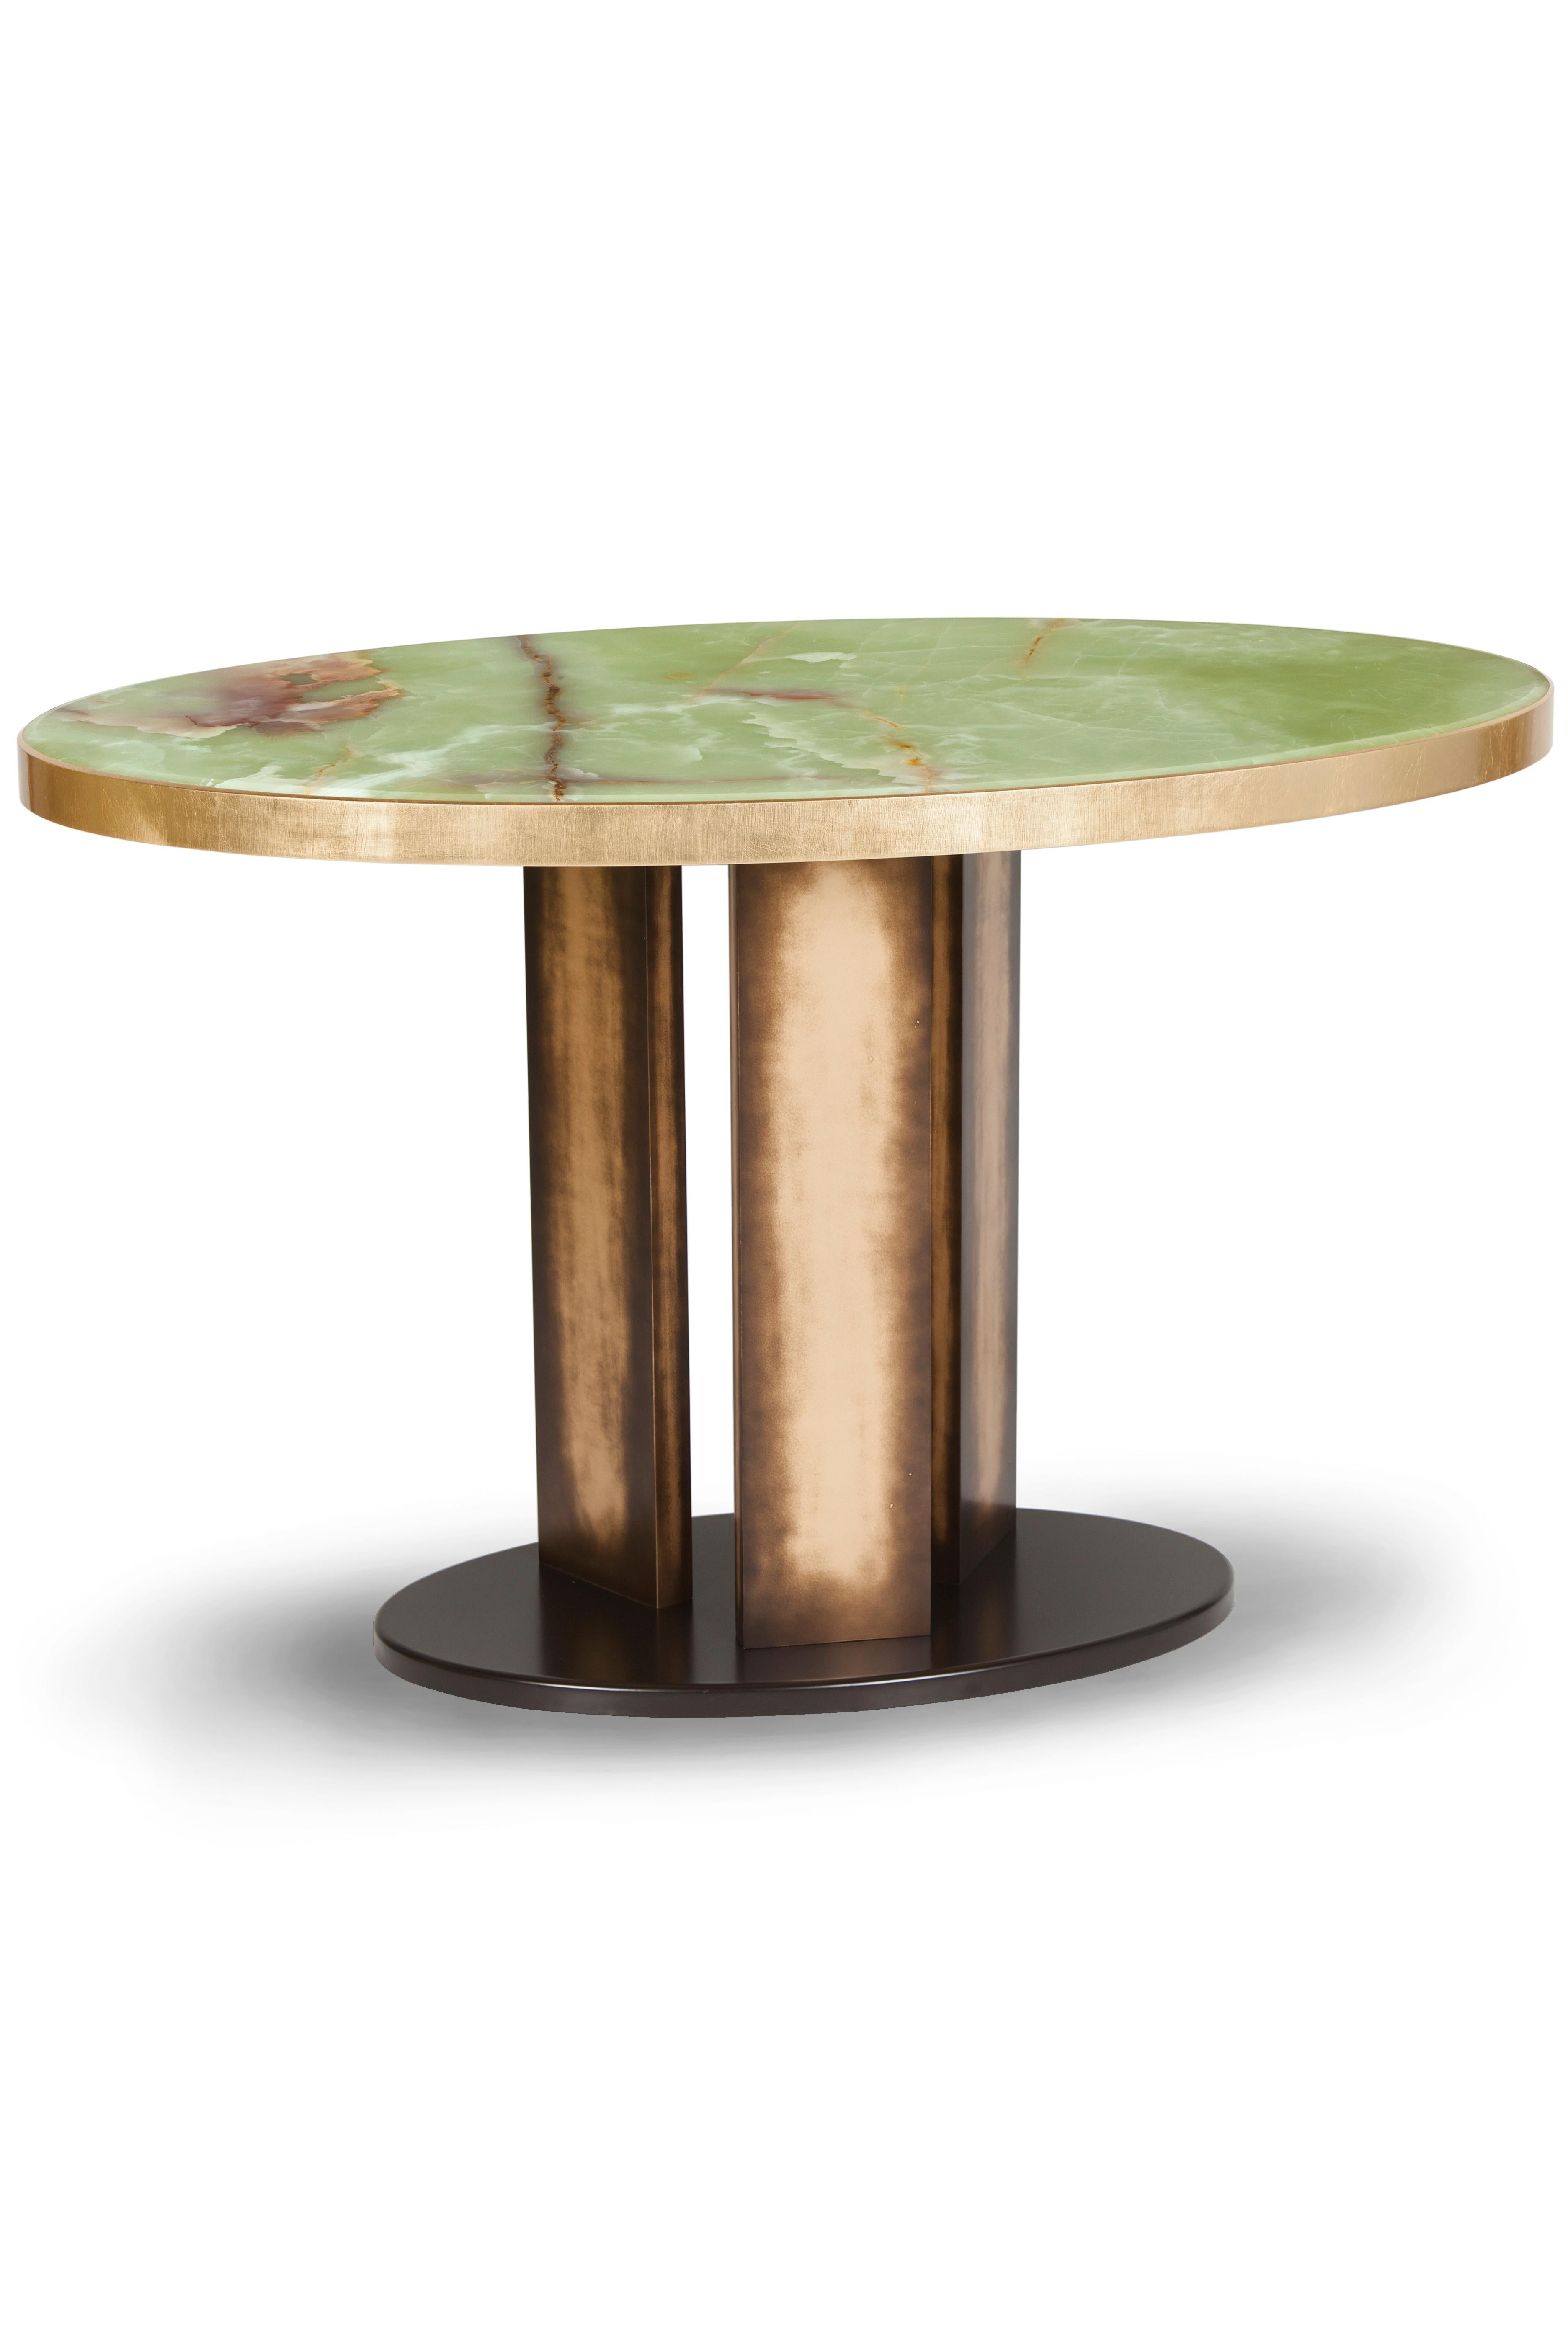 Balu dining table, Contemporary Collection, Handcrafted in Portugal - Europe by Greenapple.

Ball was designed to be the centrepiece of any dining interior. The combination between the stunning Green Onyx and the brown-gold bronze legs leaves no one